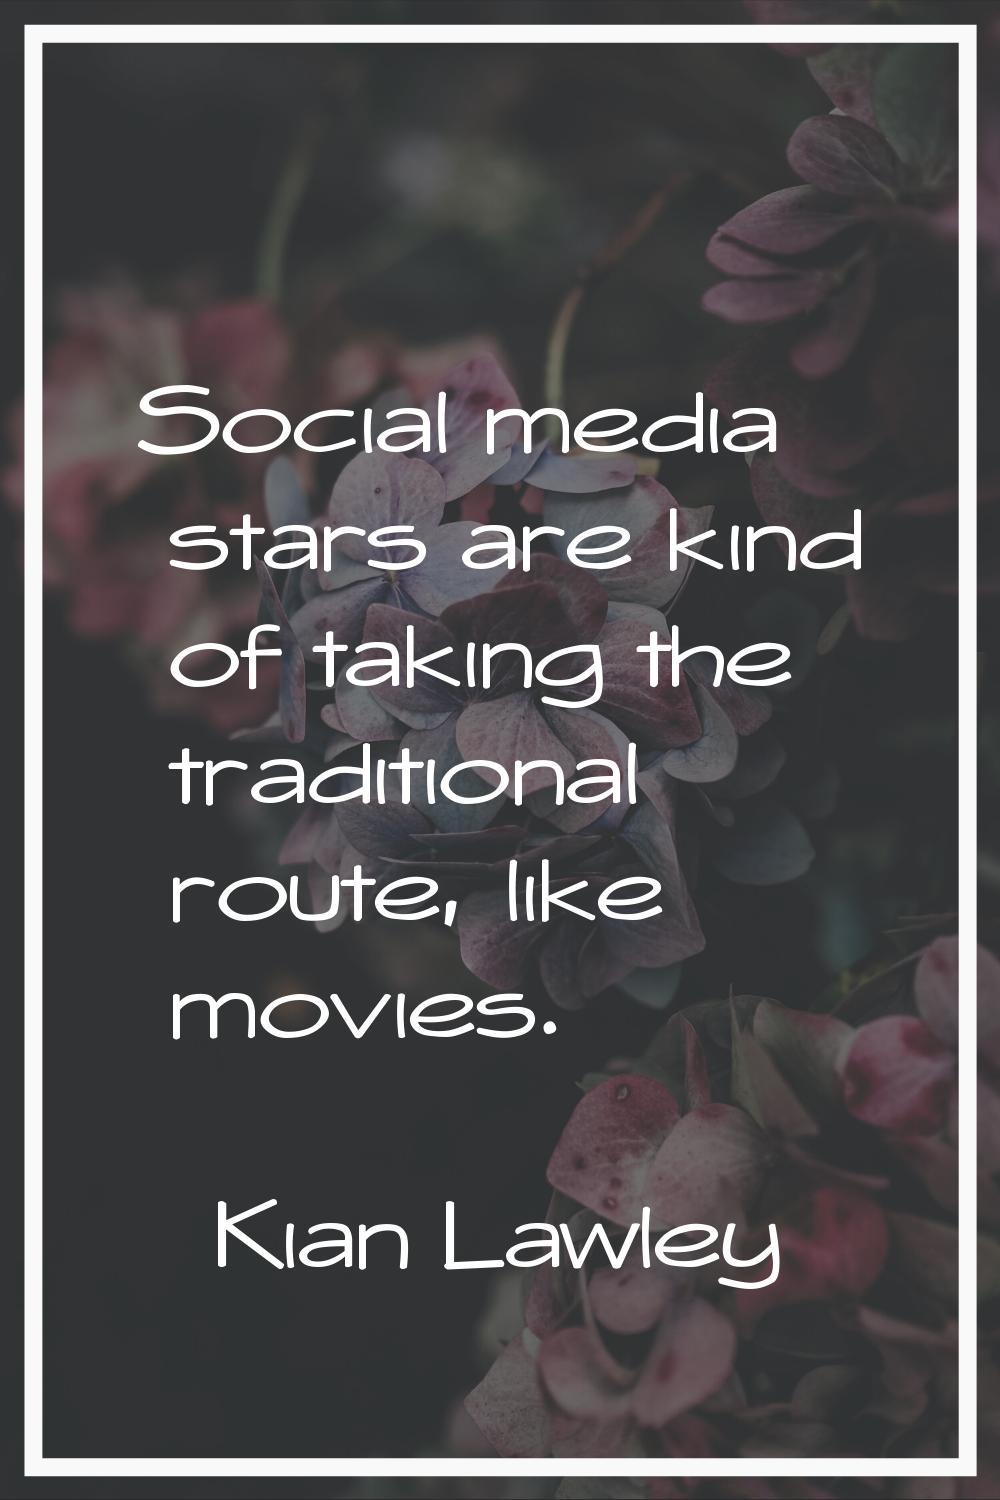 Social media stars are kind of taking the traditional route, like movies.